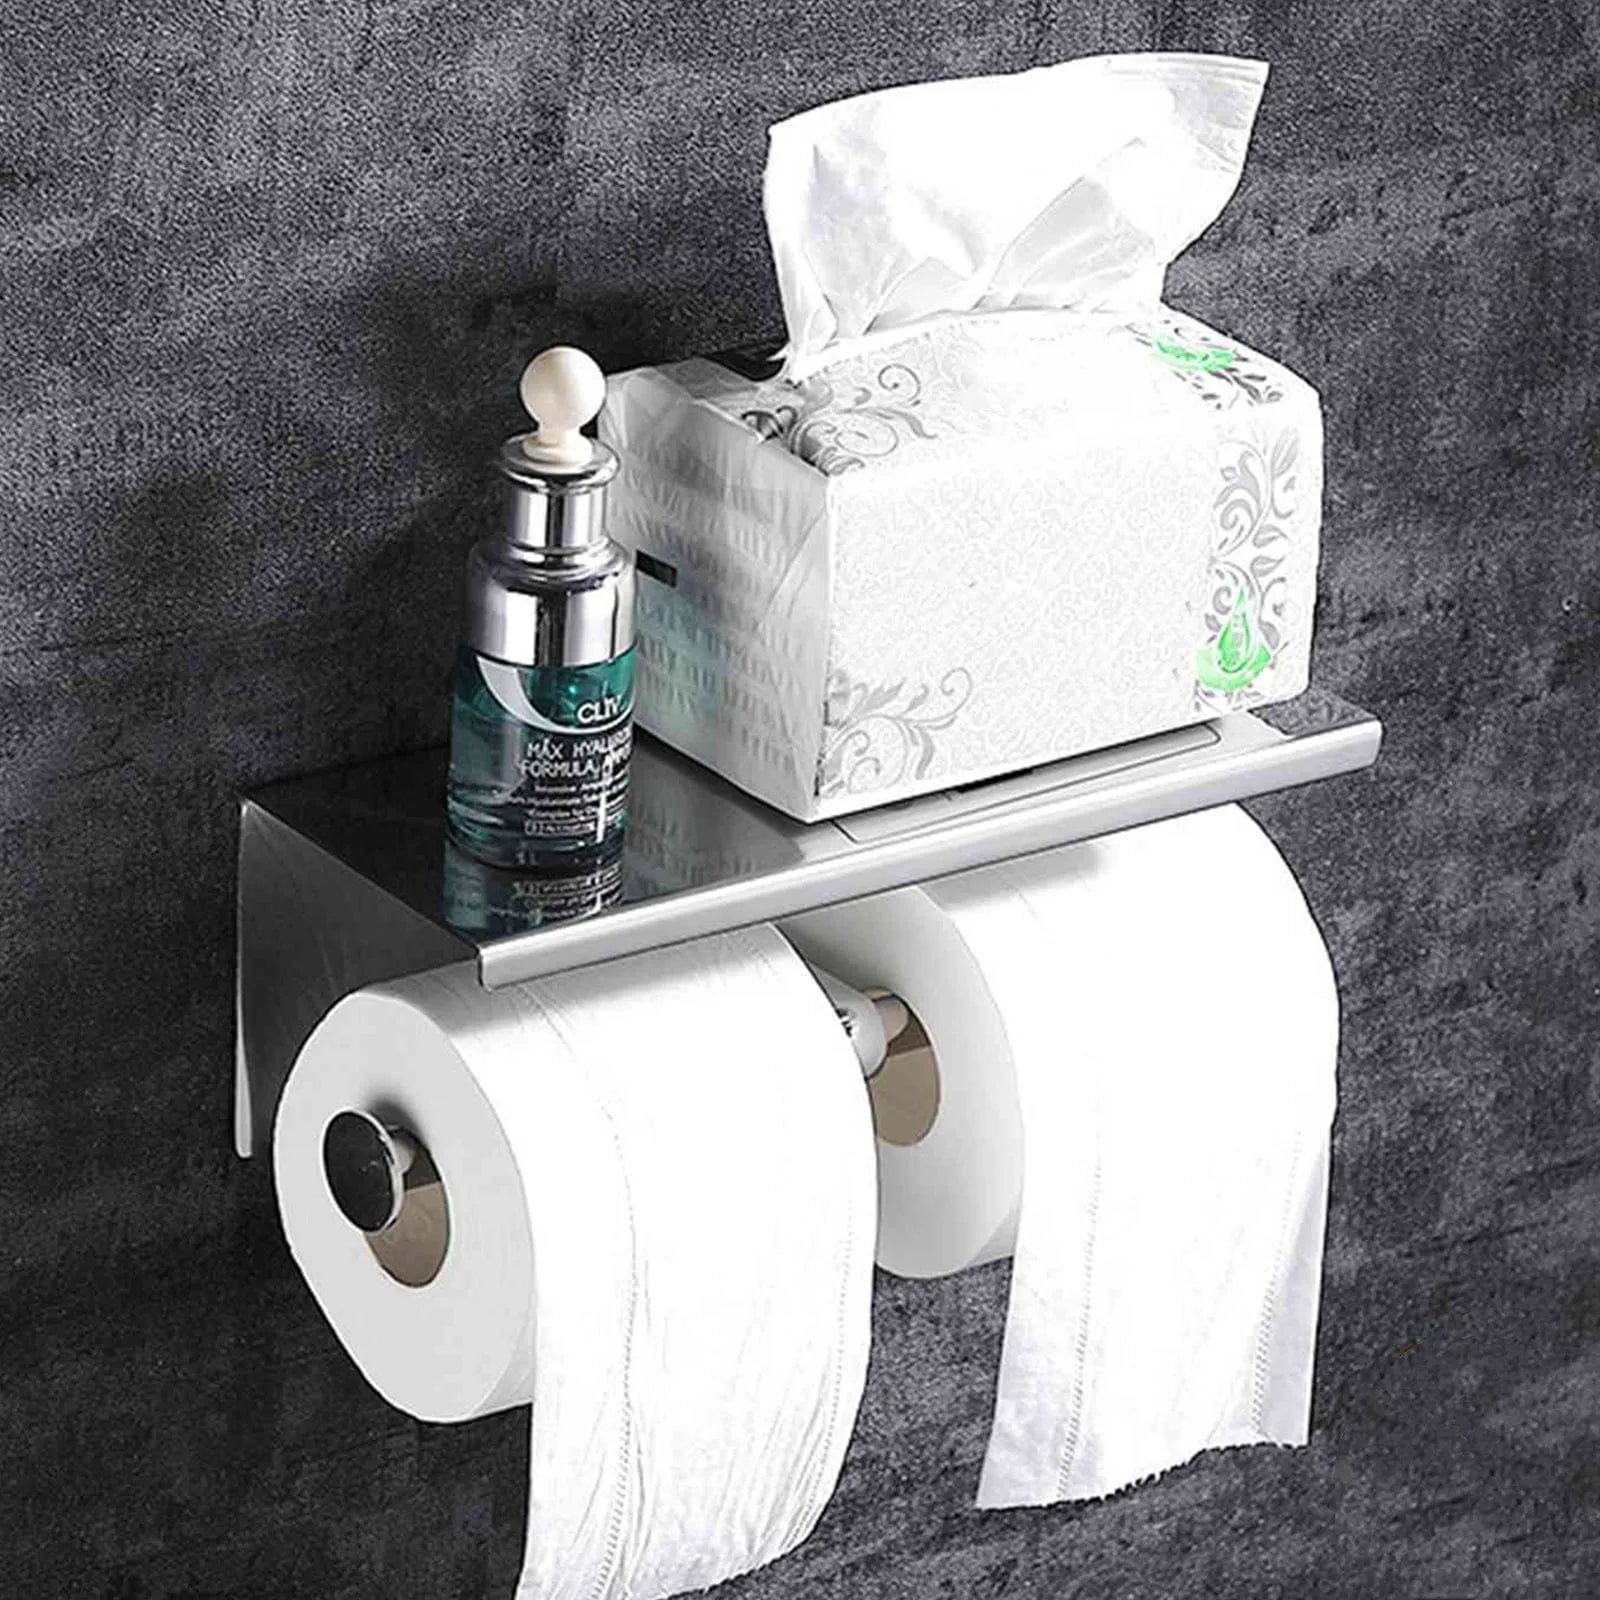 Shop Bathroom Stainless Steel Chrome Toilet Paper Holder - L8804 | Buy Online at Supply Master Accra, Ghana Bathroom Accessories Buy Tools hardware Building materials